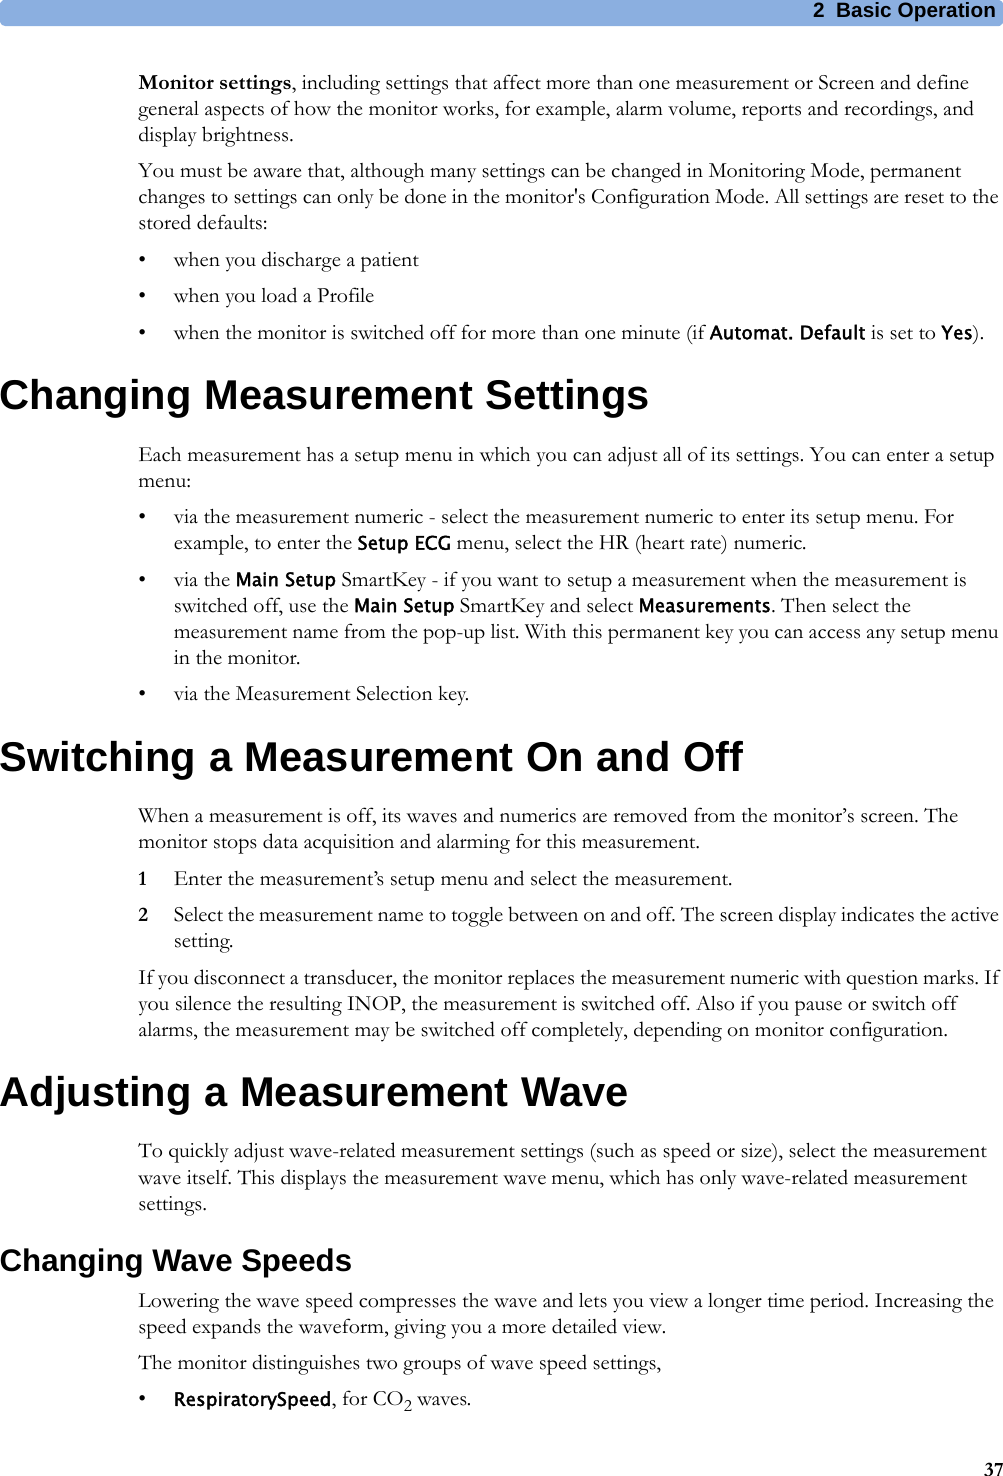 2 Basic Operation37Monitor settings, including settings that affect more than one measurement or Screen and define general aspects of how the monitor works, for example, alarm volume, reports and recordings, and display brightness.You must be aware that, although many settings can be changed in Monitoring Mode, permanent changes to settings can only be done in the monitor&apos;s Configuration Mode. All settings are reset to the stored defaults:• when you discharge a patient• when you load a Profile• when the monitor is switched off for more than one minute (if Automat. Default is set to Yes).Changing Measurement SettingsEach measurement has a setup menu in which you can adjust all of its settings. You can enter a setup menu:• via the measurement numeric - select the measurement numeric to enter its setup menu. For example, to enter the Setup ECG menu, select the HR (heart rate) numeric.•via the Main Setup SmartKey - if you want to setup a measurement when the measurement is switched off, use the Main Setup SmartKey and select Measurements. Then select the measurement name from the pop-up list. With this permanent key you can access any setup menu in the monitor.• via the Measurement Selection key.Switching a Measurement On and OffWhen a measurement is off, its waves and numerics are removed from the monitor’s screen. The monitor stops data acquisition and alarming for this measurement.1Enter the measurement’s setup menu and select the measurement.2Select the measurement name to toggle between on and off. The screen display indicates the active setting.If you disconnect a transducer, the monitor replaces the measurement numeric with question marks. If you silence the resulting INOP, the measurement is switched off. Also if you pause or switch off alarms, the measurement may be switched off completely, depending on monitor configuration.Adjusting a Measurement WaveTo quickly adjust wave-related measurement settings (such as speed or size), select the measurement wave itself. This displays the measurement wave menu, which has only wave-related measurement settings.Changing Wave SpeedsLowering the wave speed compresses the wave and lets you view a longer time period. Increasing the speed expands the waveform, giving you a more detailed view.The monitor distinguishes two groups of wave speed settings,•RespiratorySpeed, for CO2 waves.